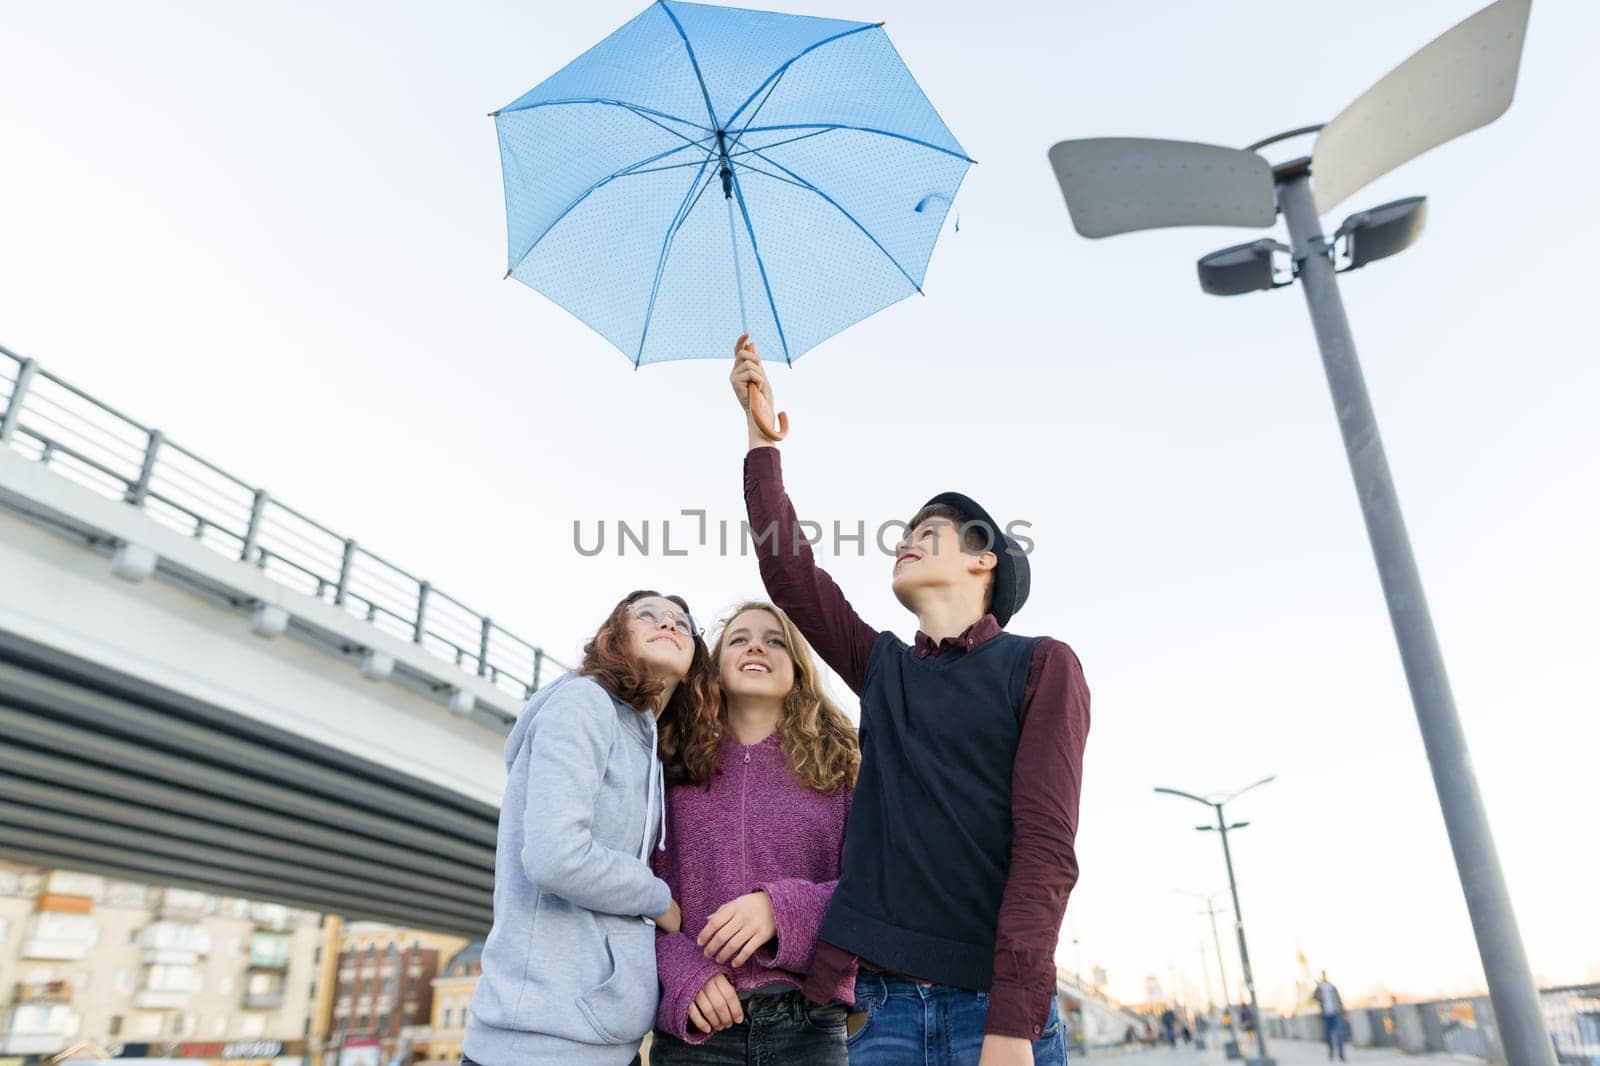 Group of teenagers friends having fun in the city, laughing kids with umbrella. Urban teen lifestyle